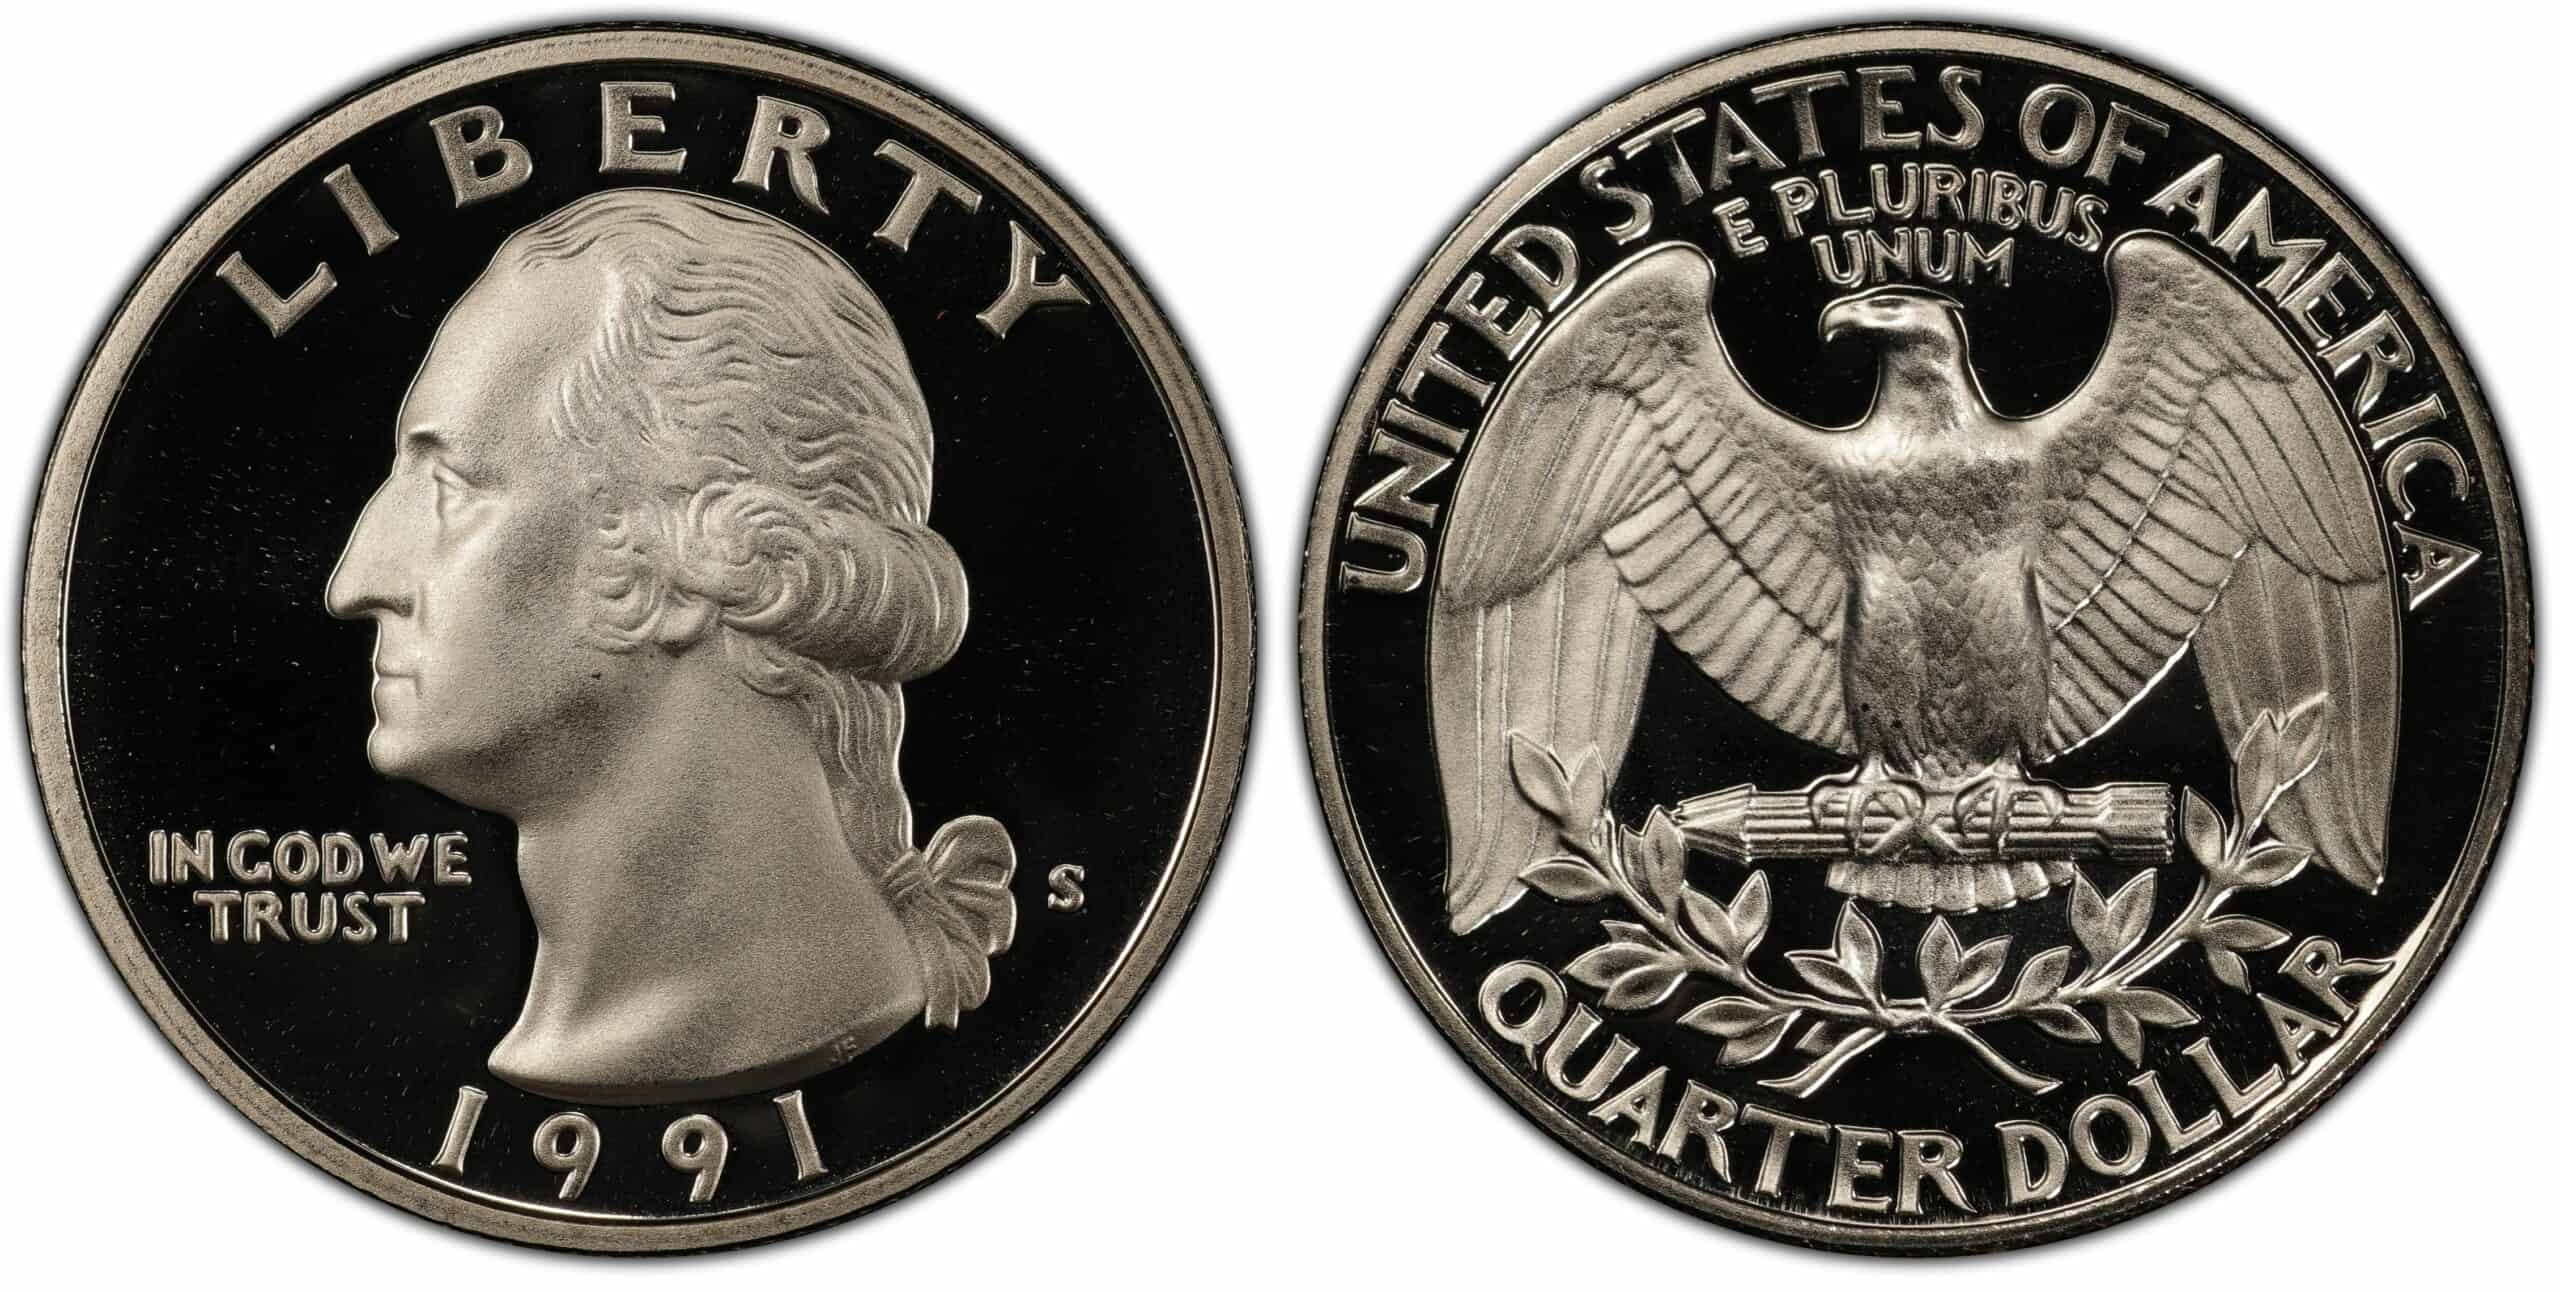 1991 S Proof Quarter Coin